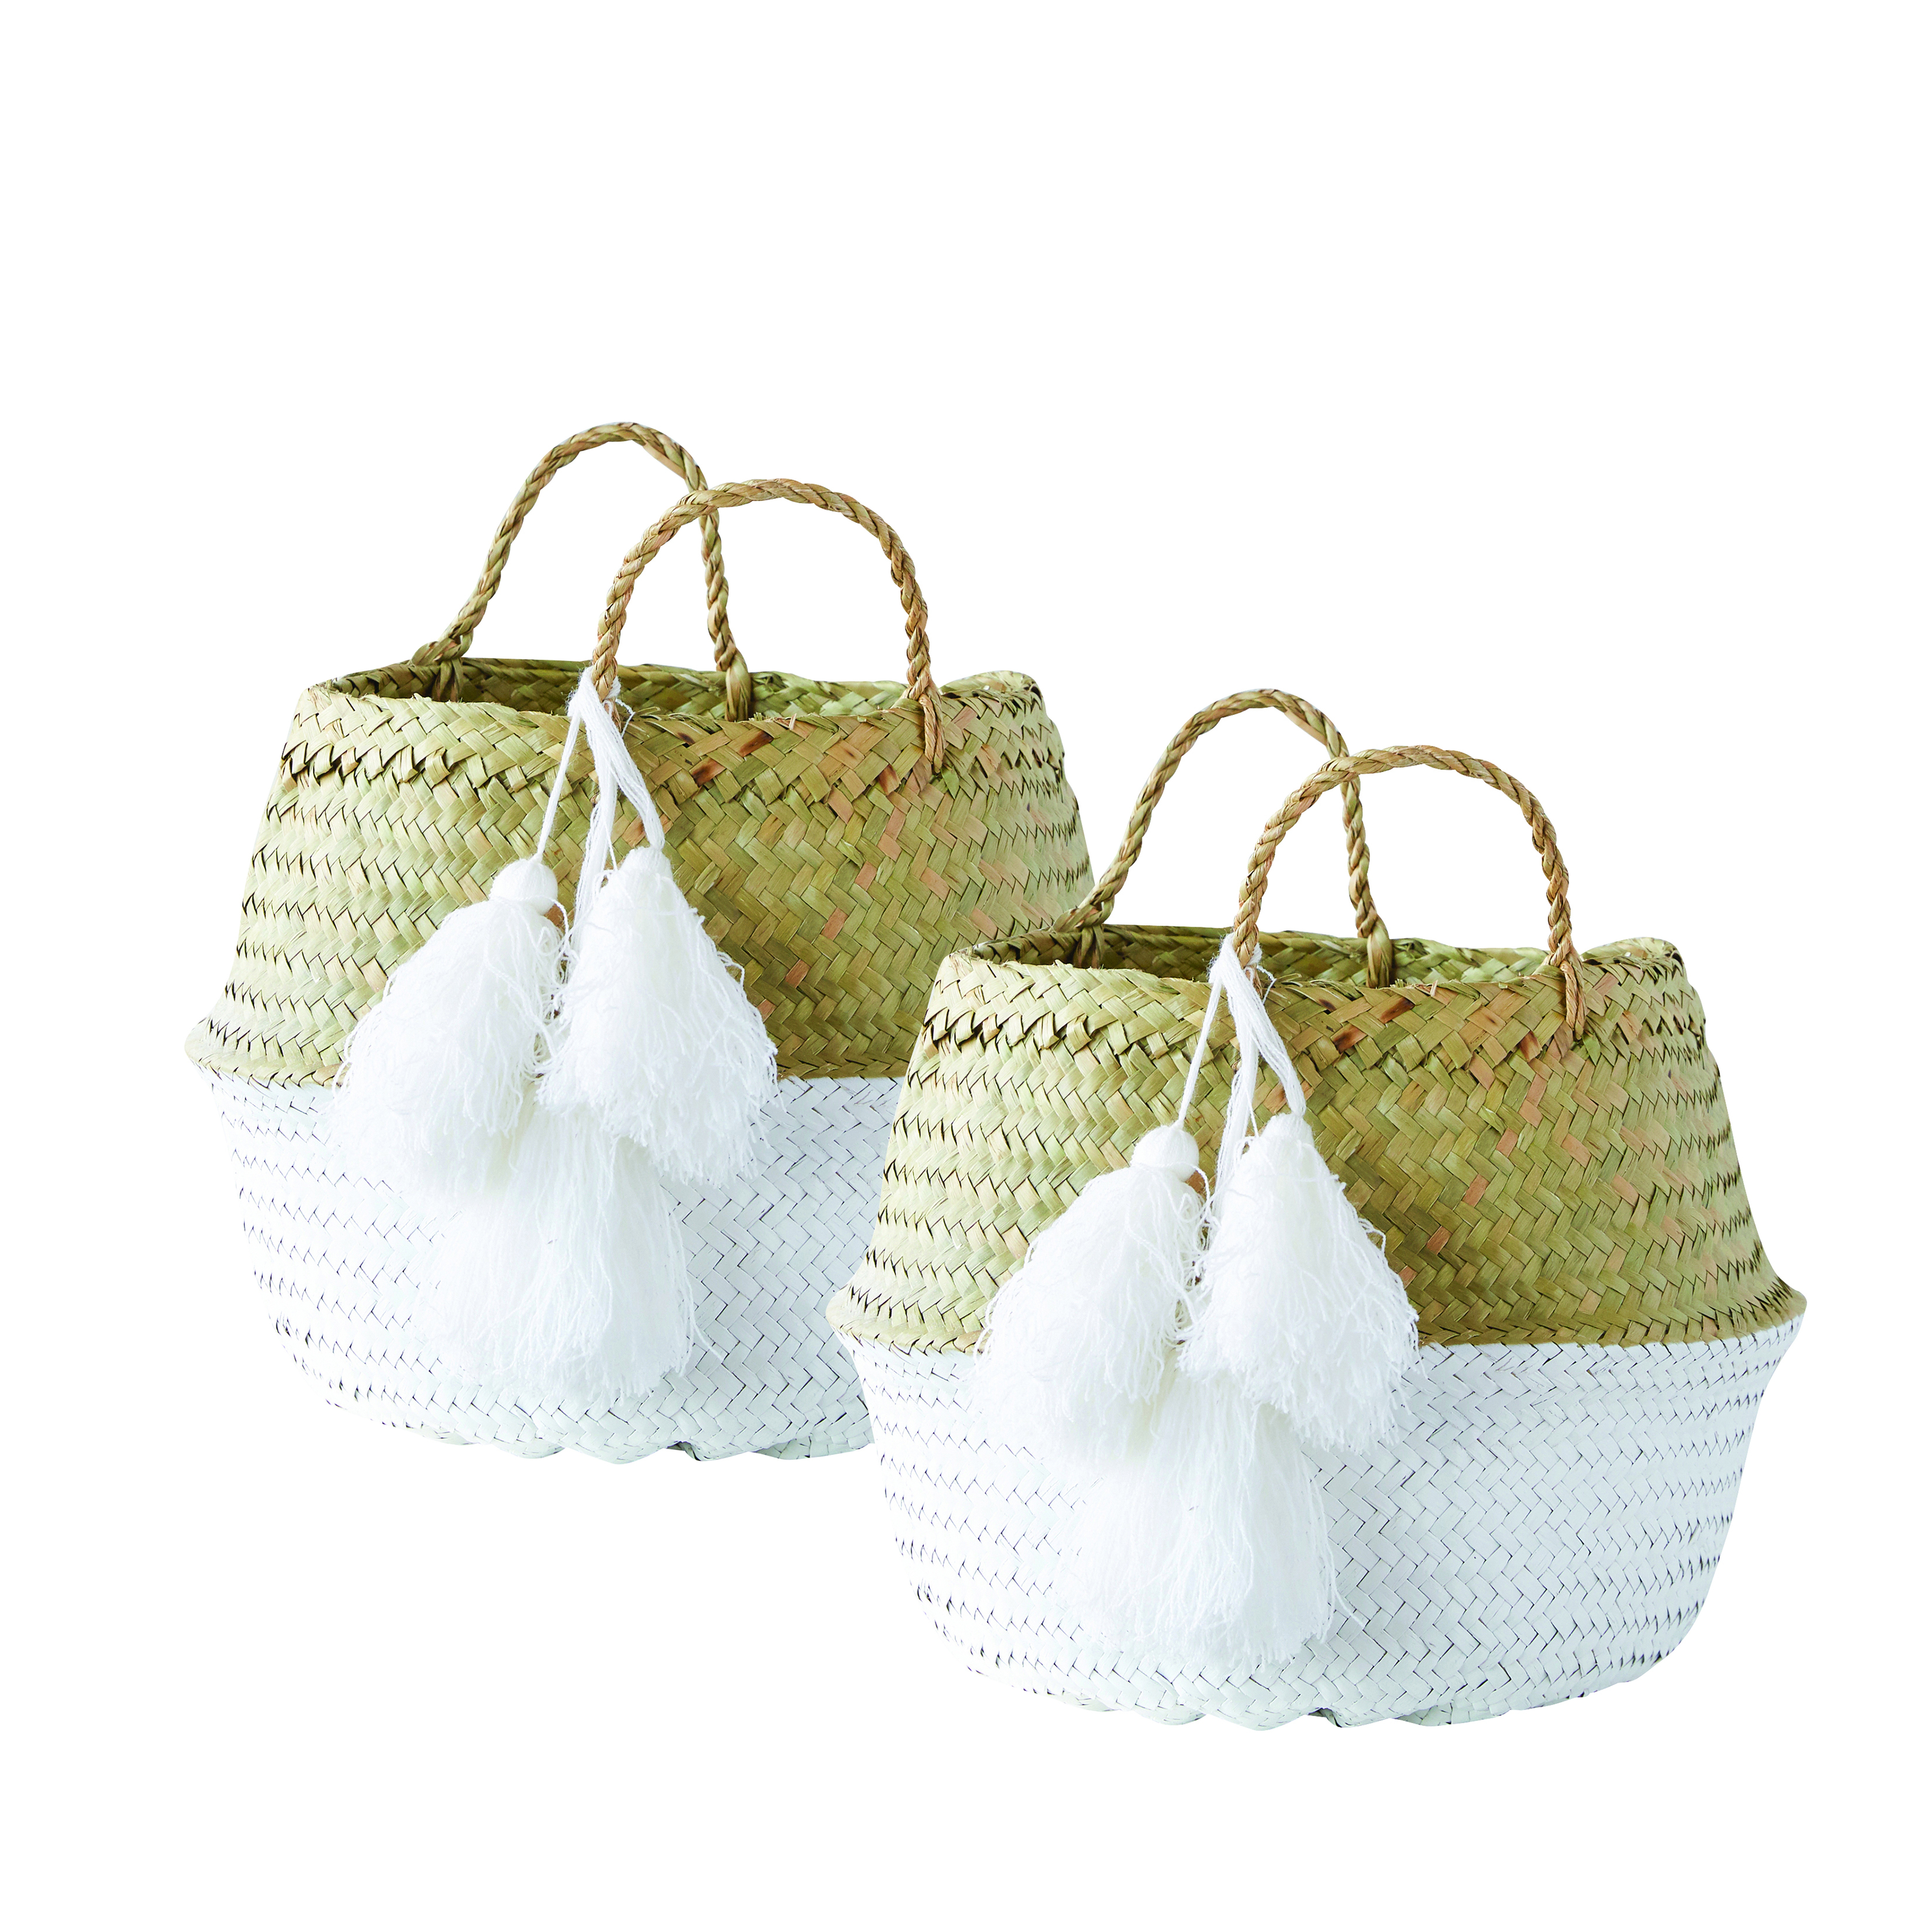 Beige & White Collapsible Palm Leaf Baskets with Large Tassels (Set of 2 Sizes) - Nomad Home